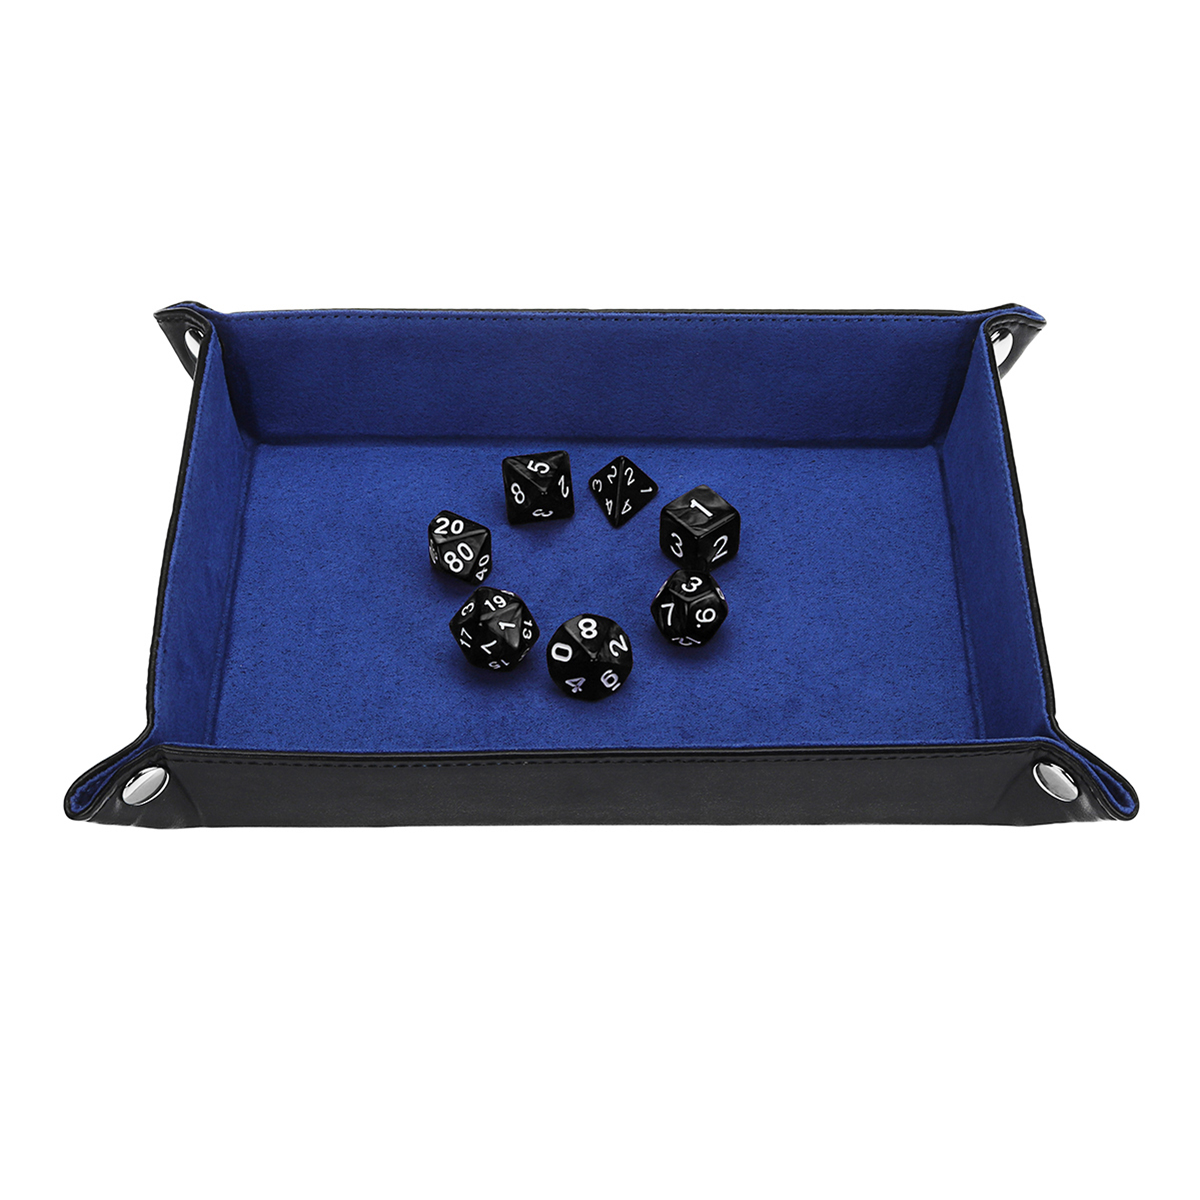 Portable-Fold-Dice-Tray-PU-Leather-with-7-Polyhedral-Dice-for-Tabletop-Dice-Games-1346582-4